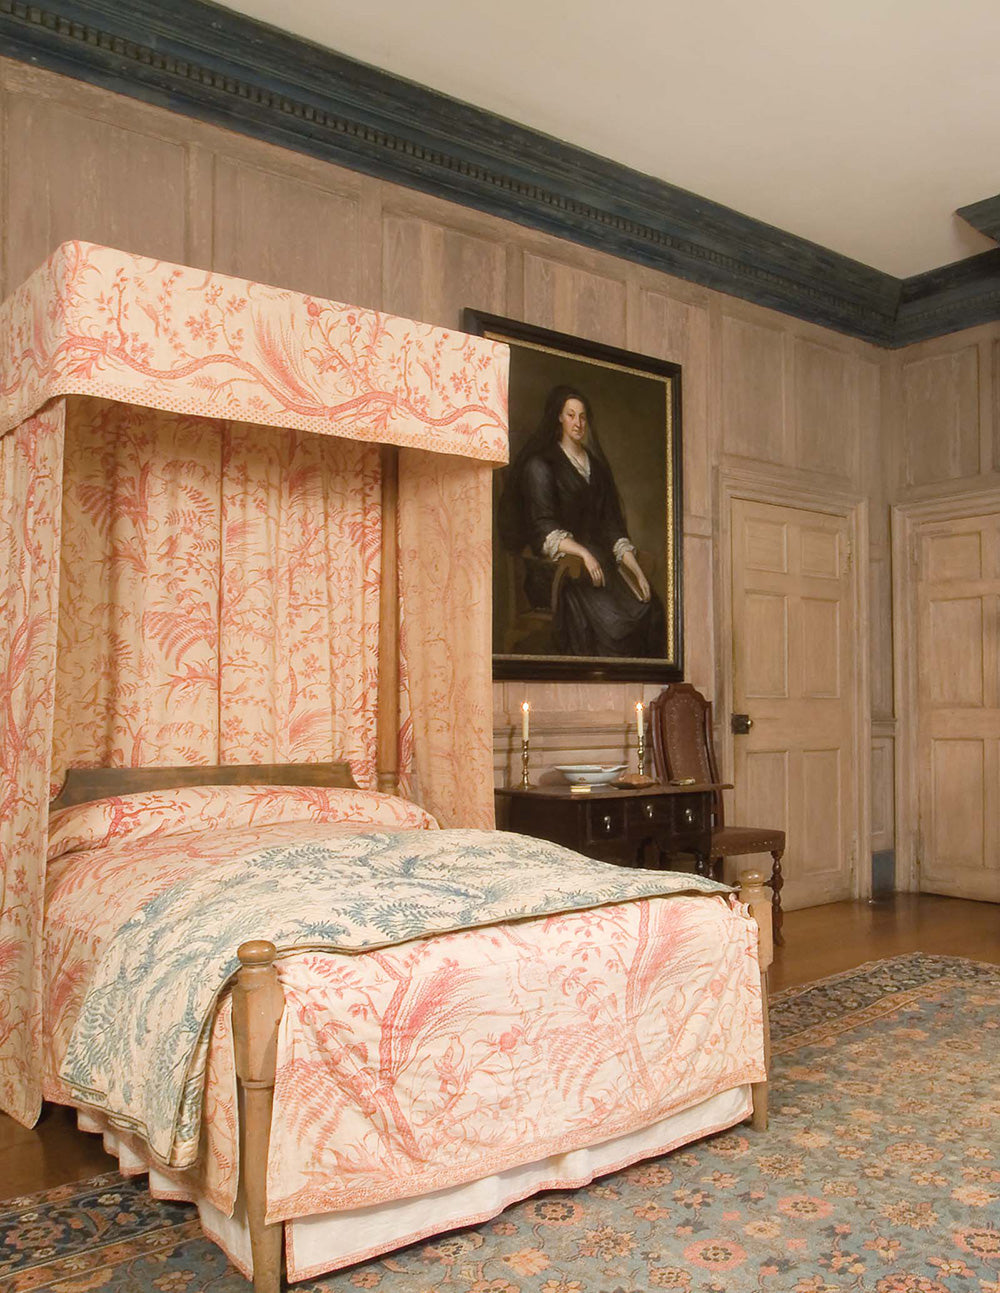 Traditional American Rooms (Winterthur Style Sourcebook)